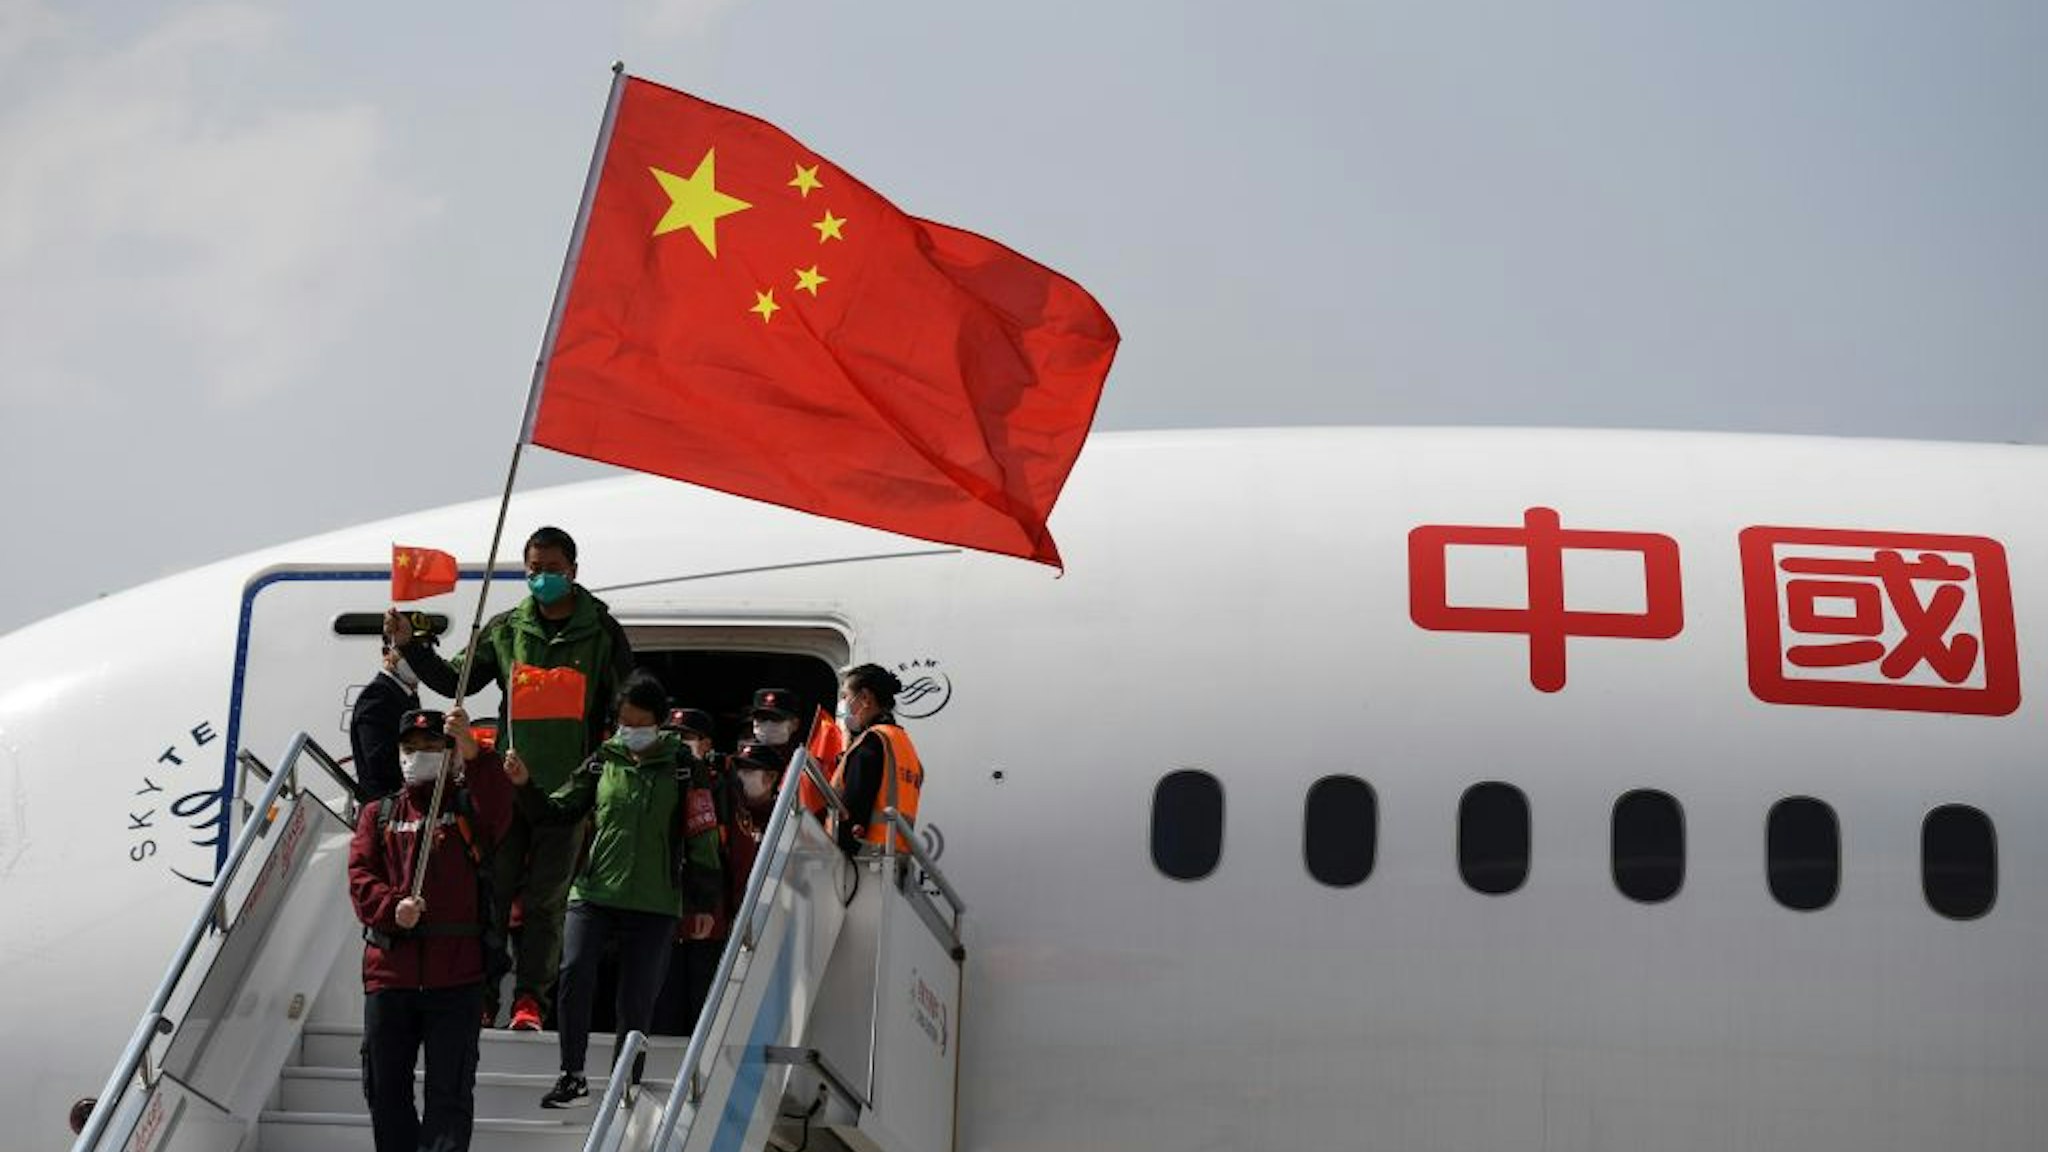 Medical assistance team members holding Chinese Flags take off a plane at Kunming Changshui International Airport on March 22, 2020 in Kunming, Yunnan Province of China.